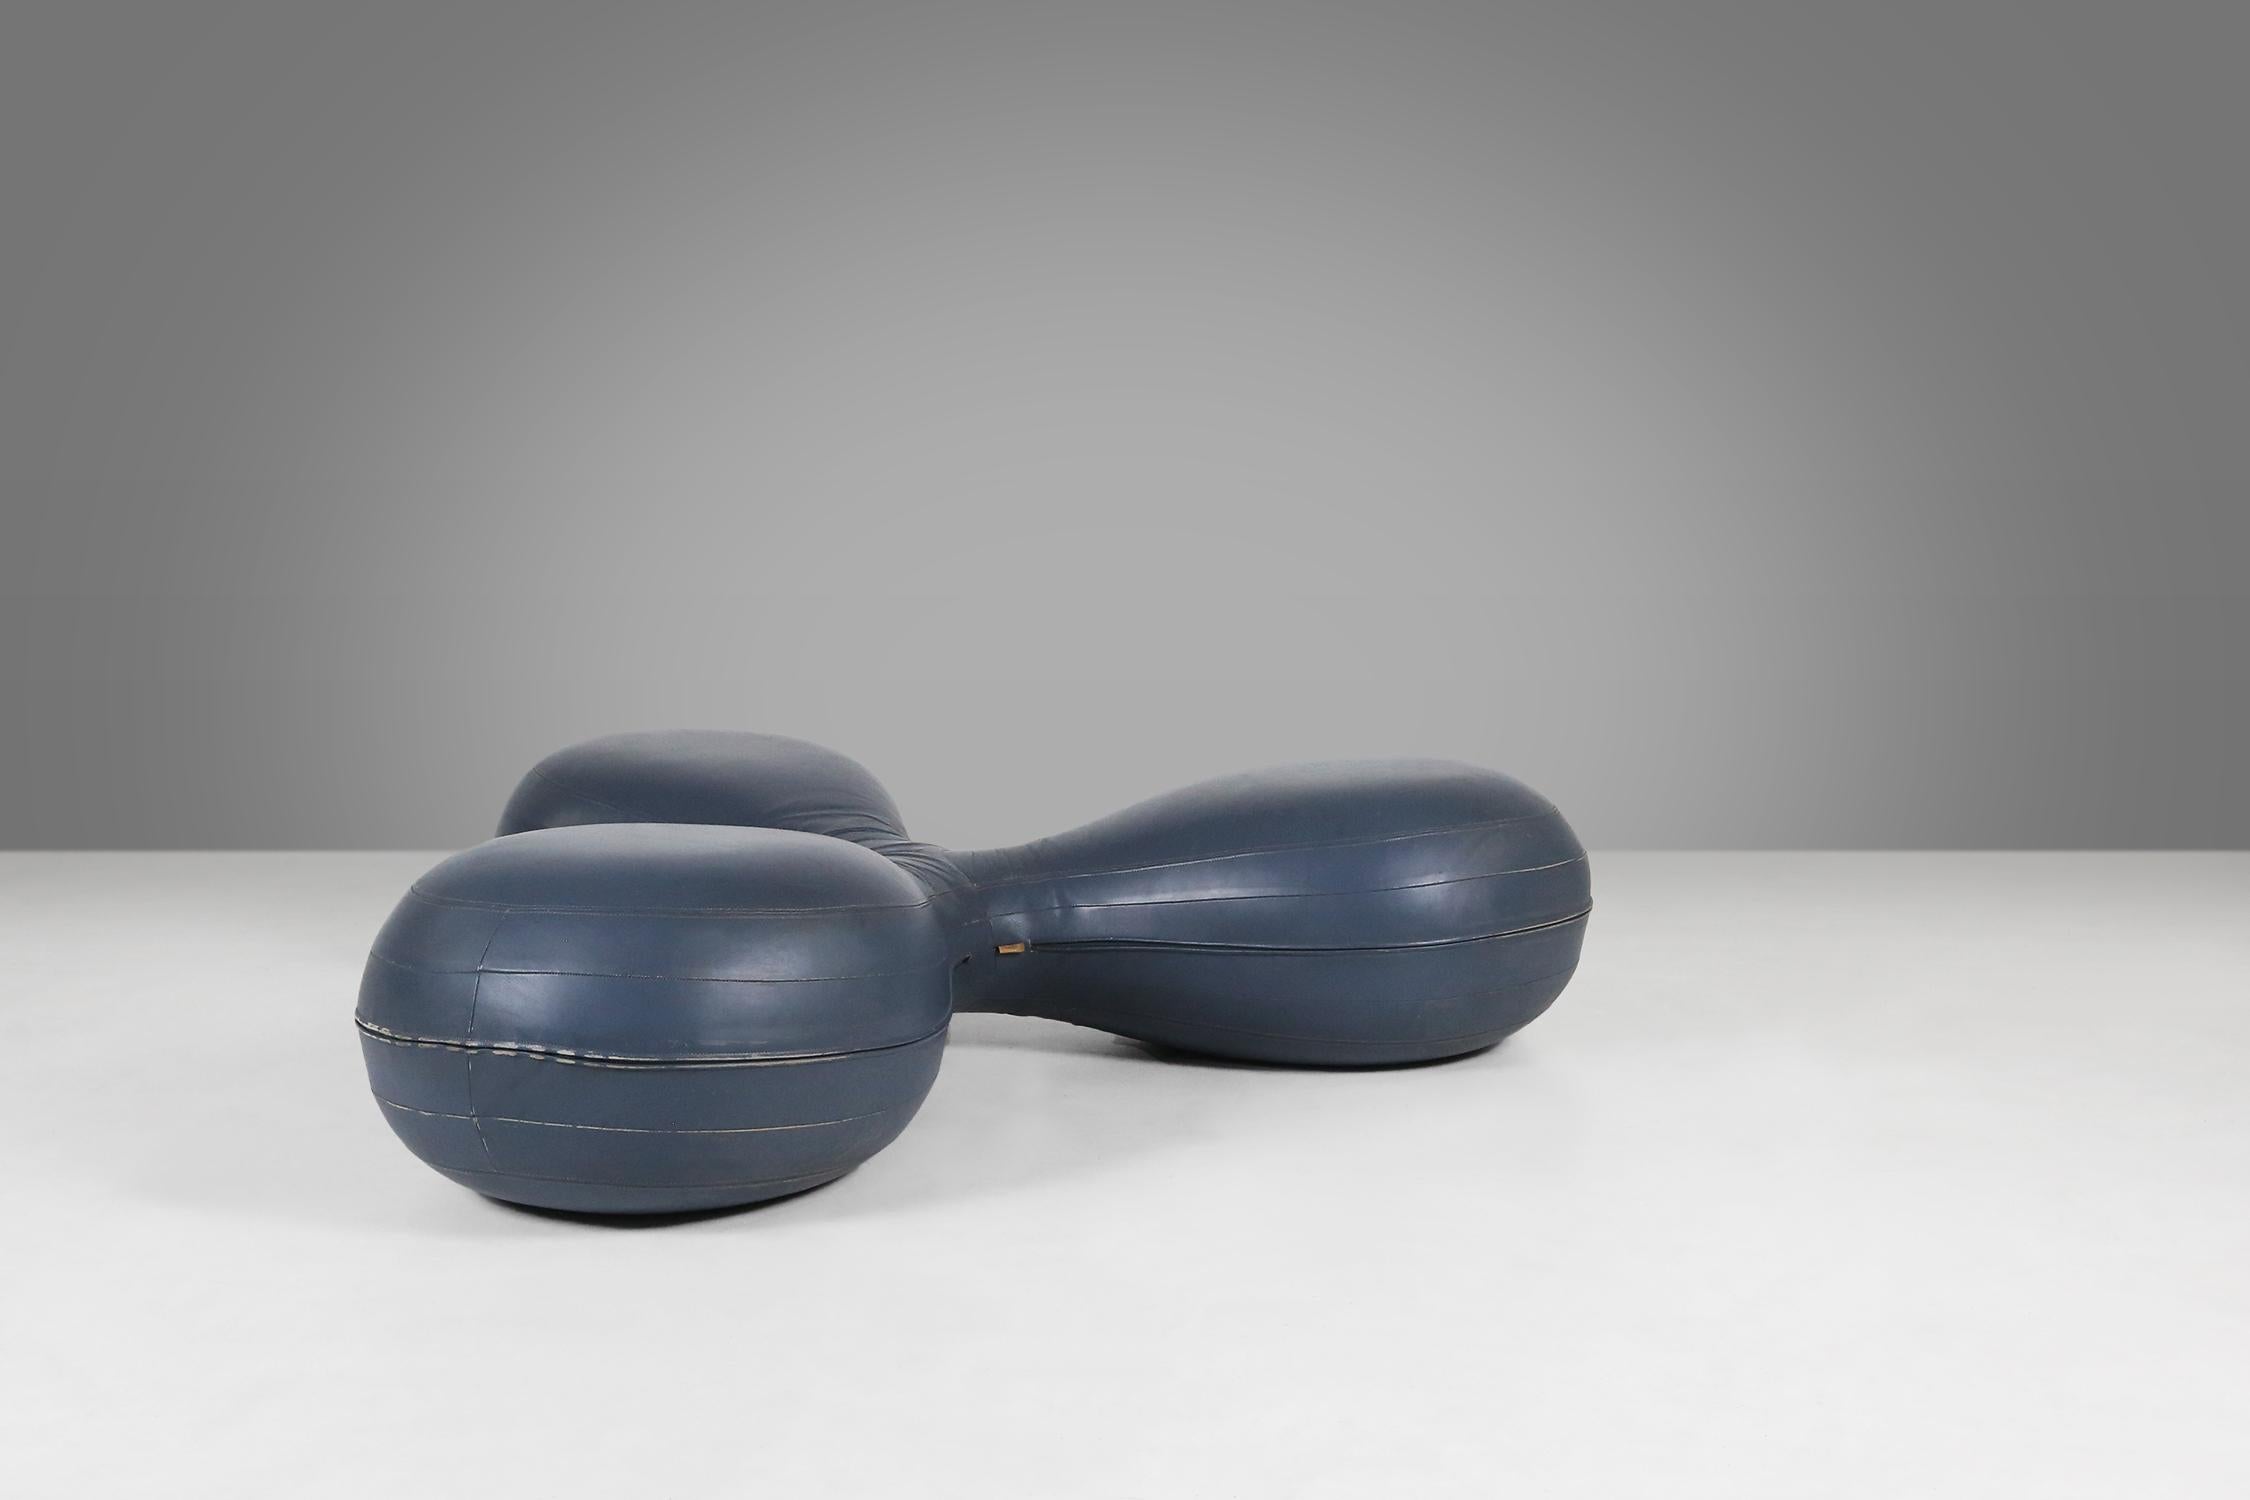 This pouf has an innovative design with three connected round sections that add a striking and modern element to your interior.

The pouf is upholstered in dark blue leather that is durable and easy to maintain. The visible stitching details add to